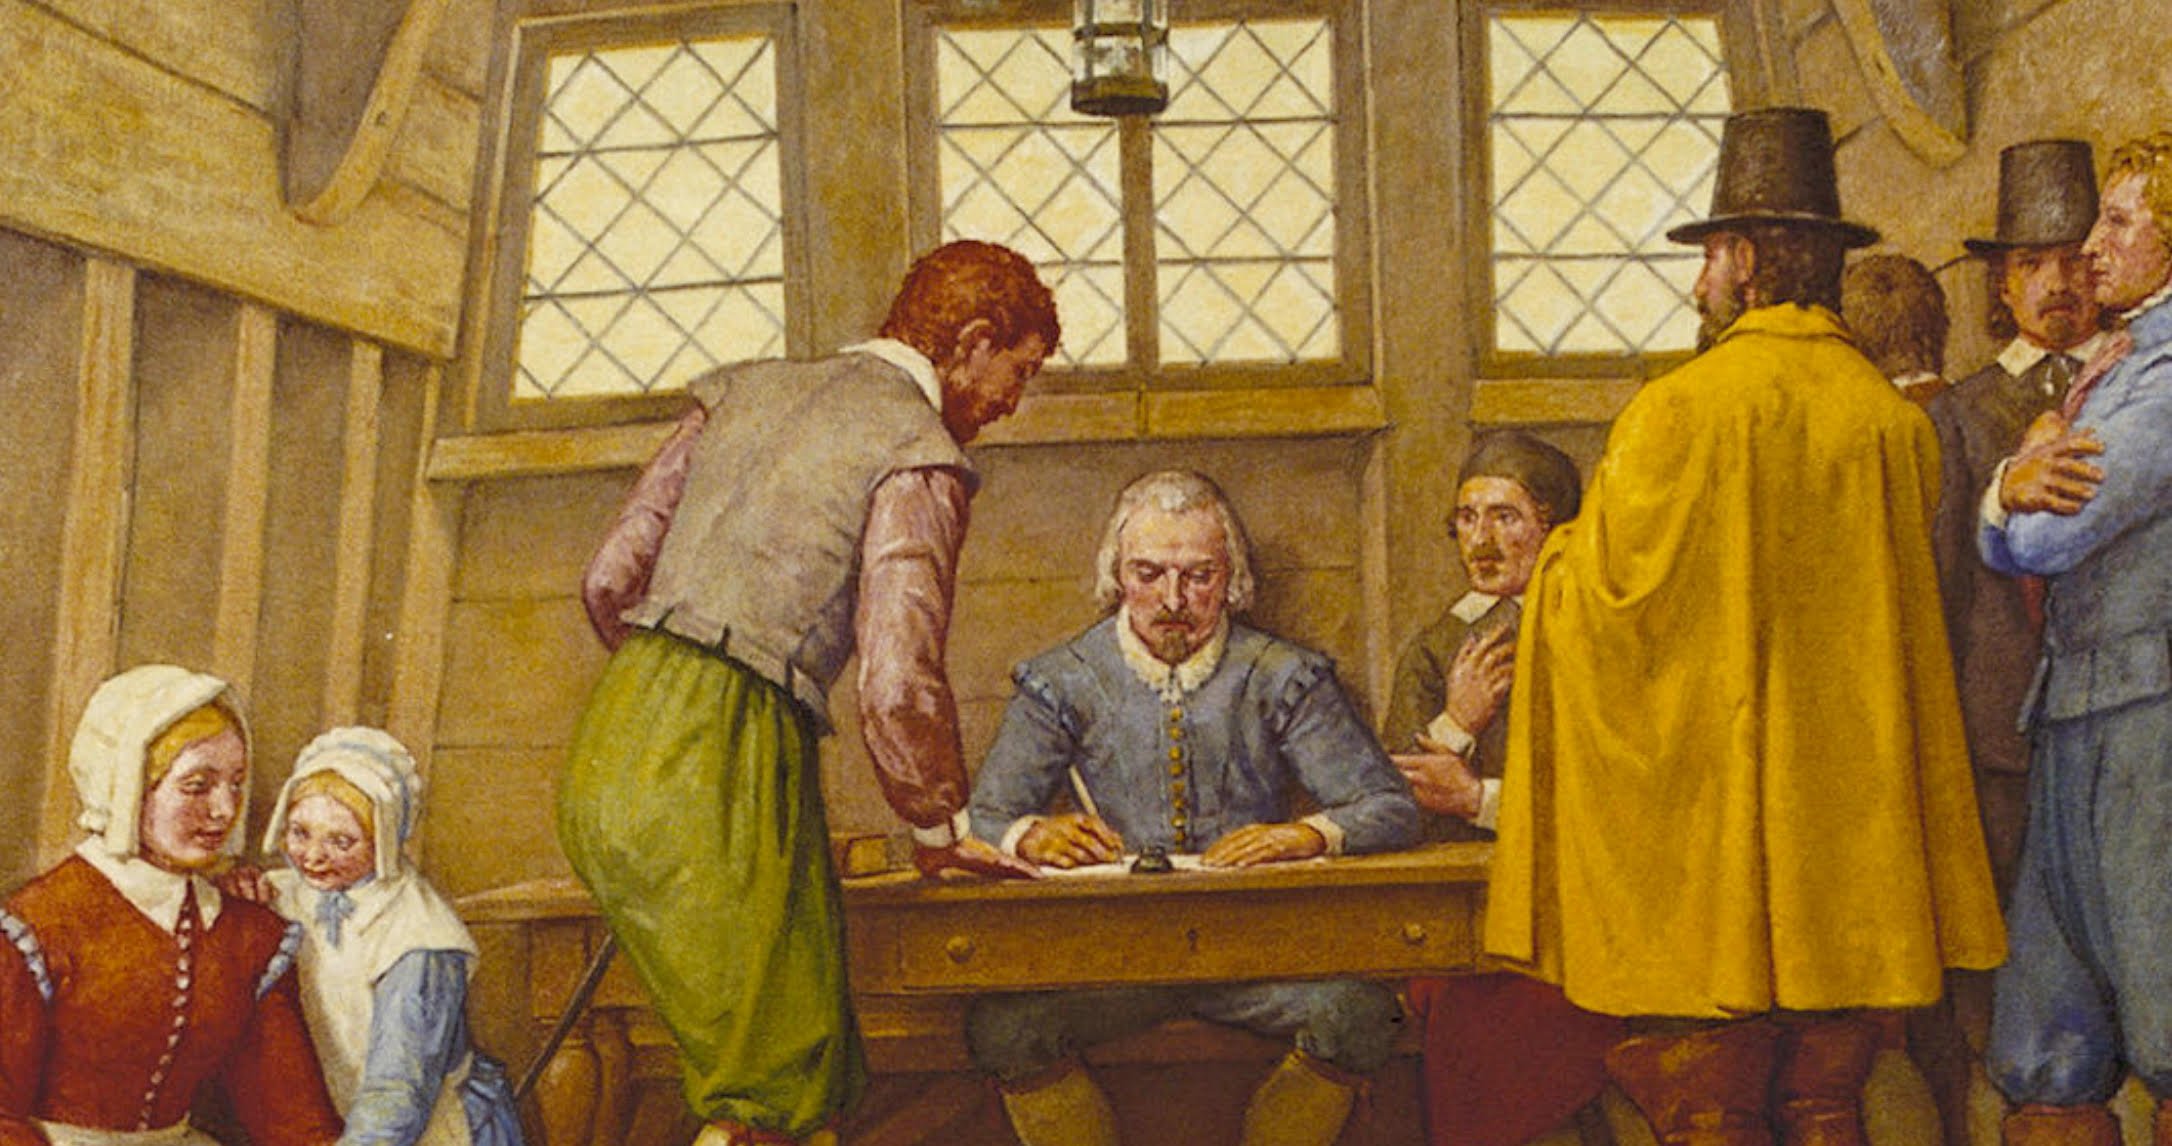 Featured image for “America’s Theological Social Contract: The Mayflower Compact”